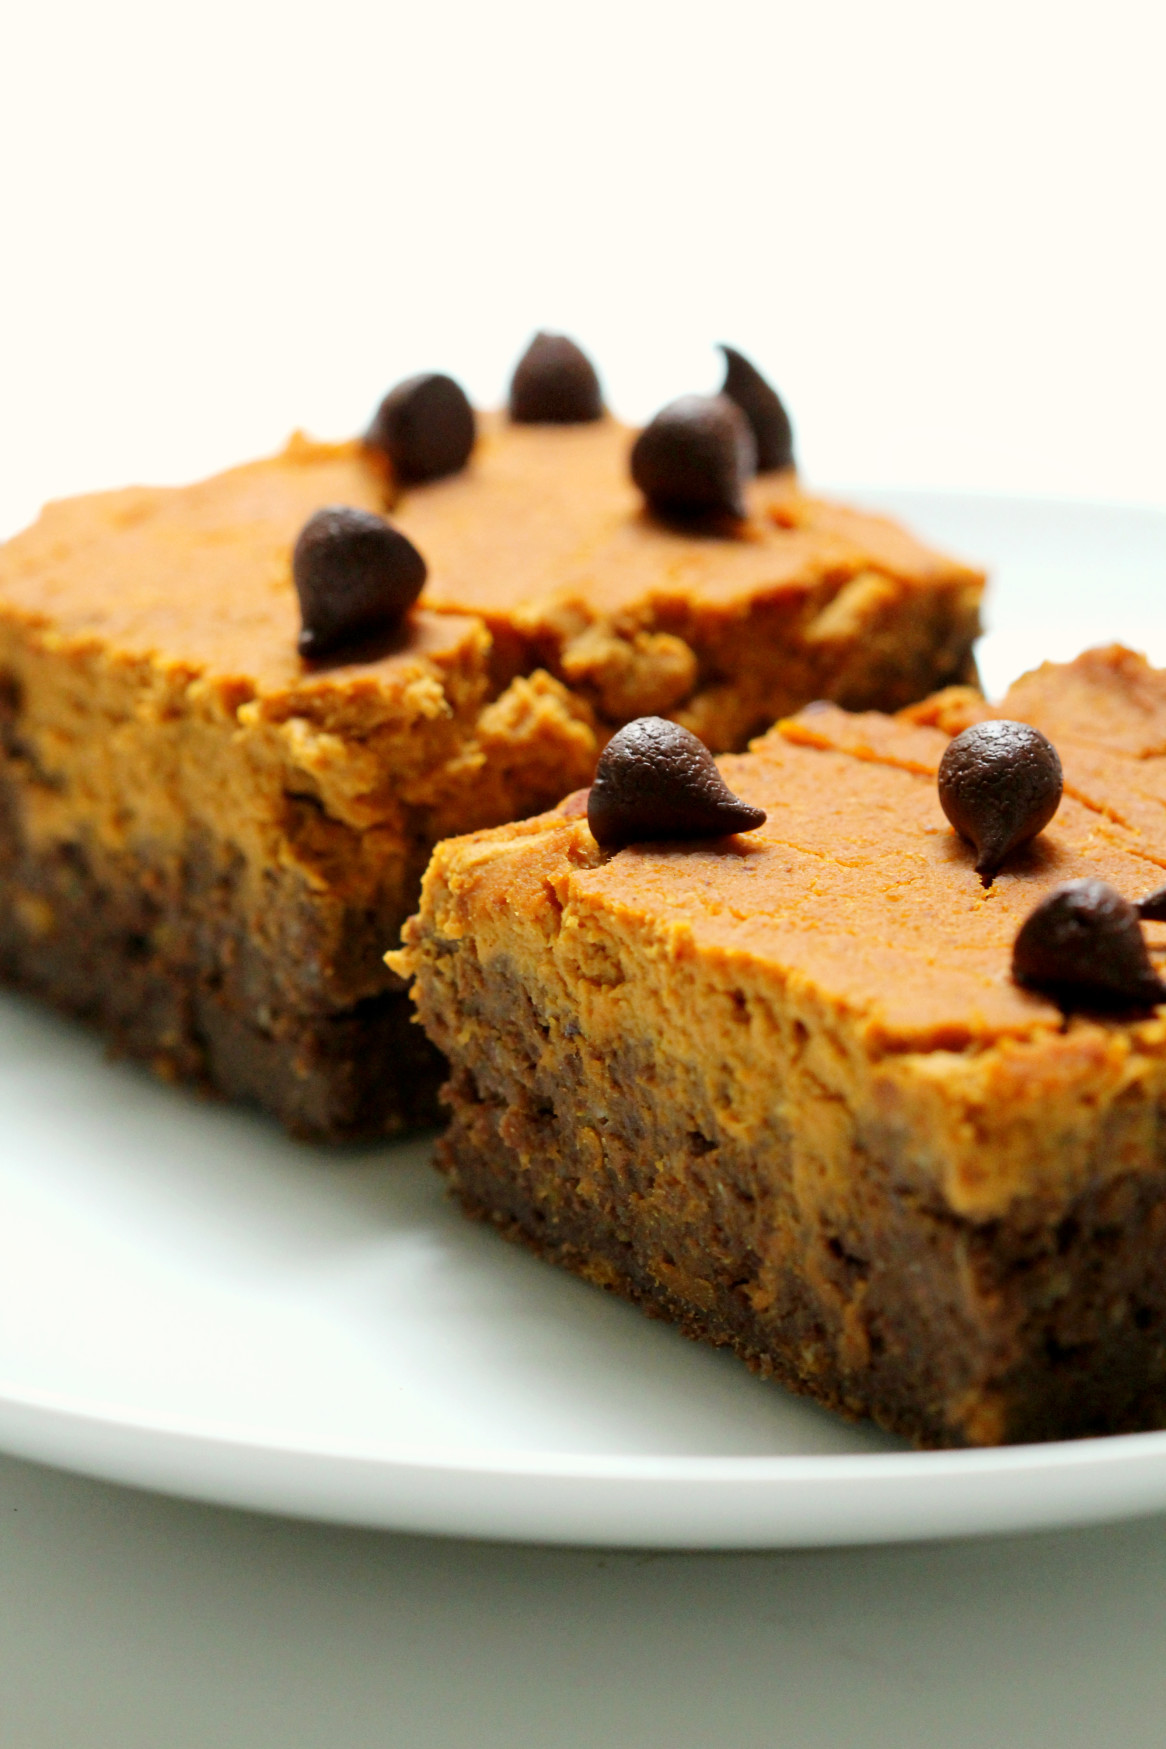 Pumpkin Peanut Butter Layer Brownies | Strength and Sunshine @RebeccaGF666 Where pumpkin, peanut, and chocolate combine! Pumpkin Peanut Butter Layer Brownies will make you rethink your definition of brownie. These gluten-free and vegan brownies are the healthiest of holiday indulgences, you won't have to stop at one! They can be dessert or breakfast!